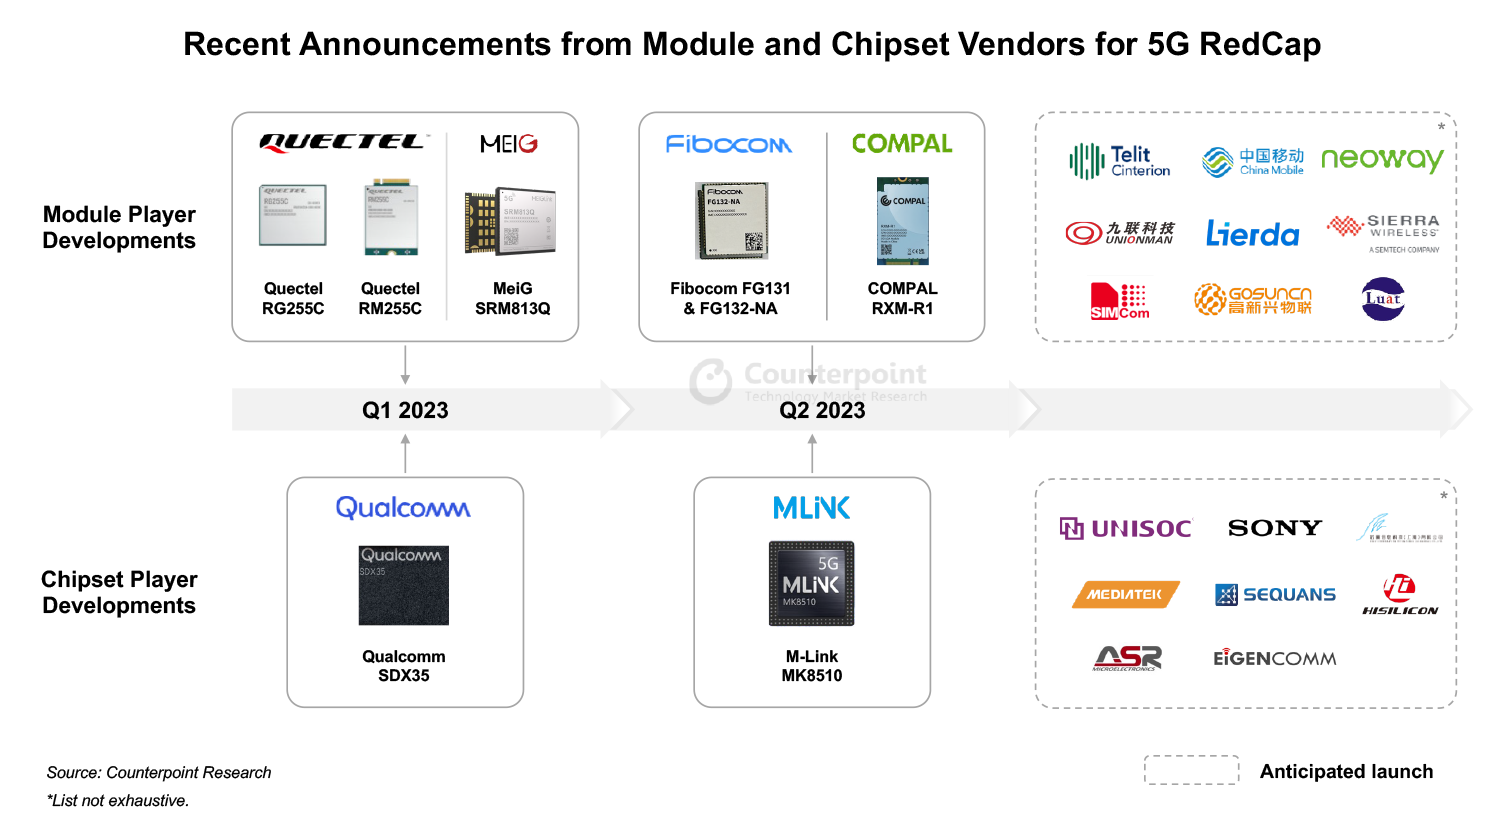 Announcement from module and chipset vendors for 5G RedCap